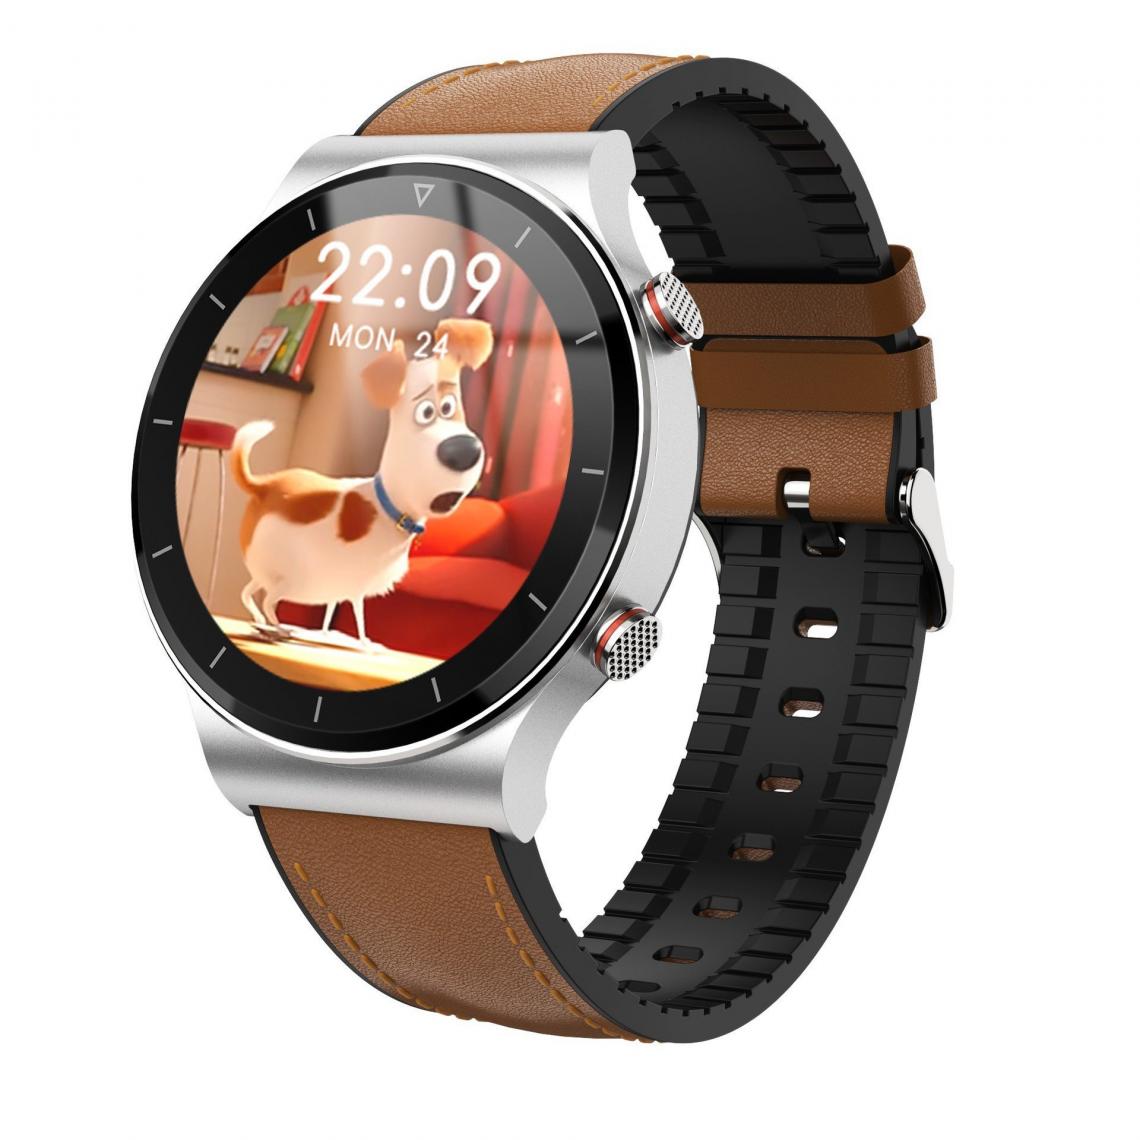 Chronotech Montres - Chronus Smart Watch, 1.3 Inch Round Colorful Display, Bluetooth Call, Local Music, Message Reminder, Multi-Dial, Multiple Sports Modes, IP67 Waterproof, Female Menstrual Cycle(Brown) - Montre connectée